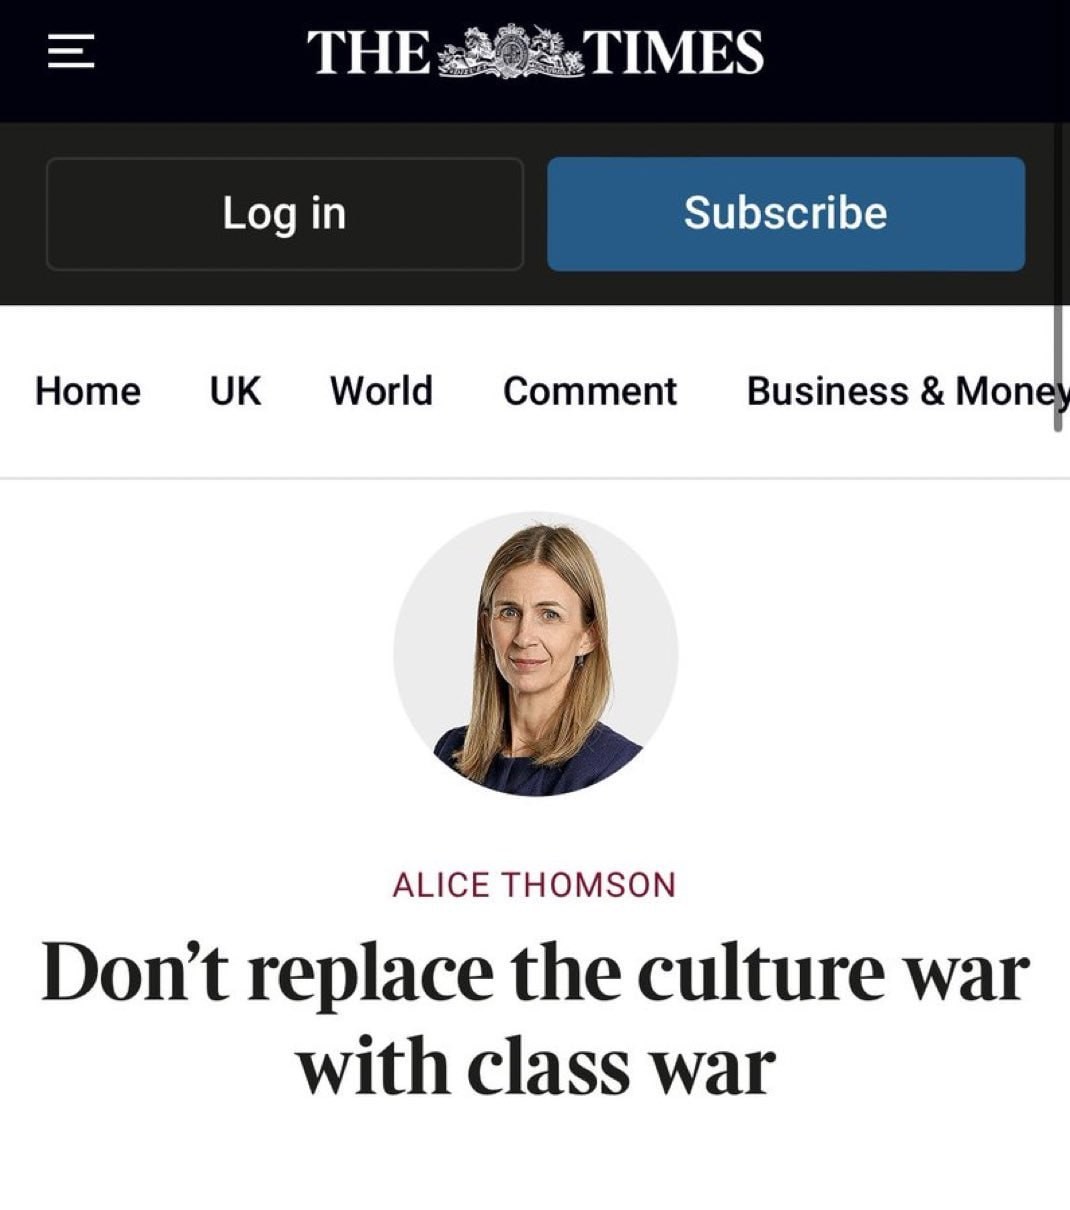 The Times: Don't replace the culture war with class war